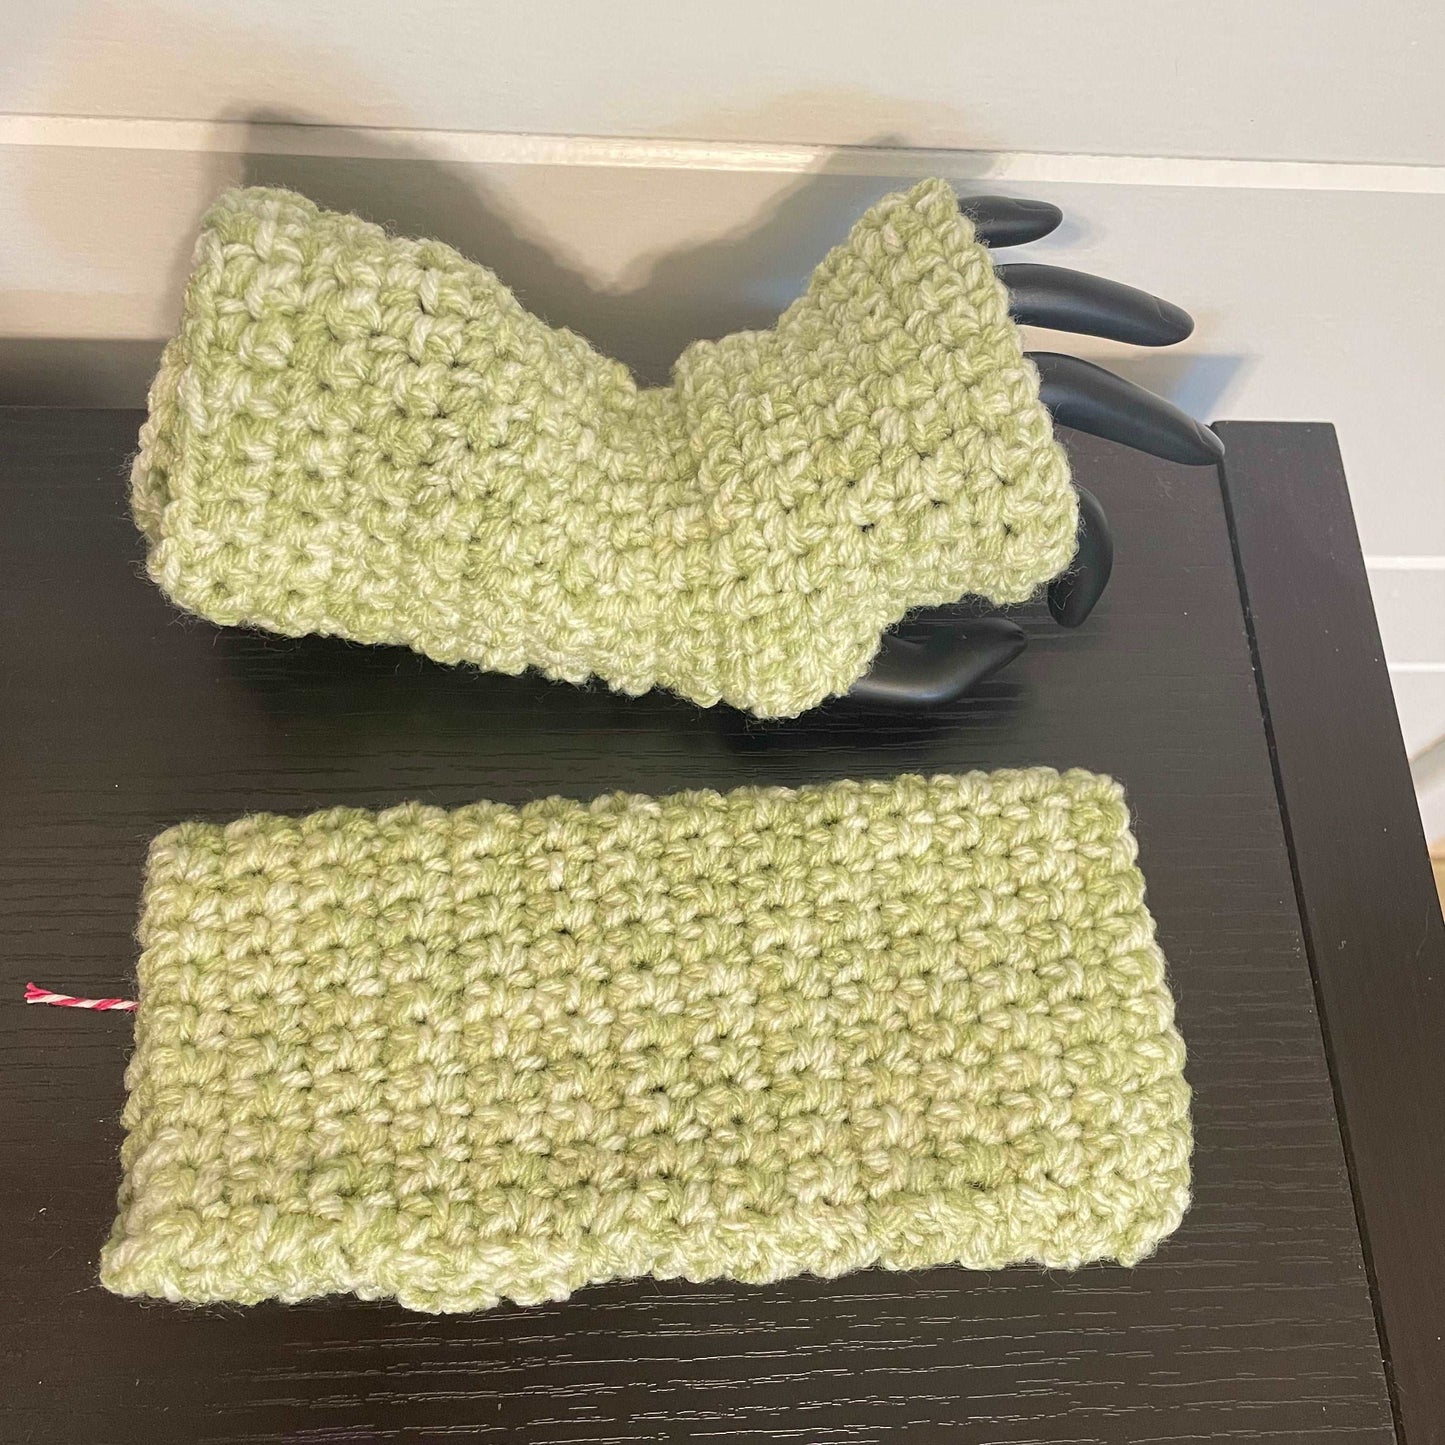 Fingerless Gloves in Lime Green Marble Gaming Texting Hand Crocheted Wrist Warmers